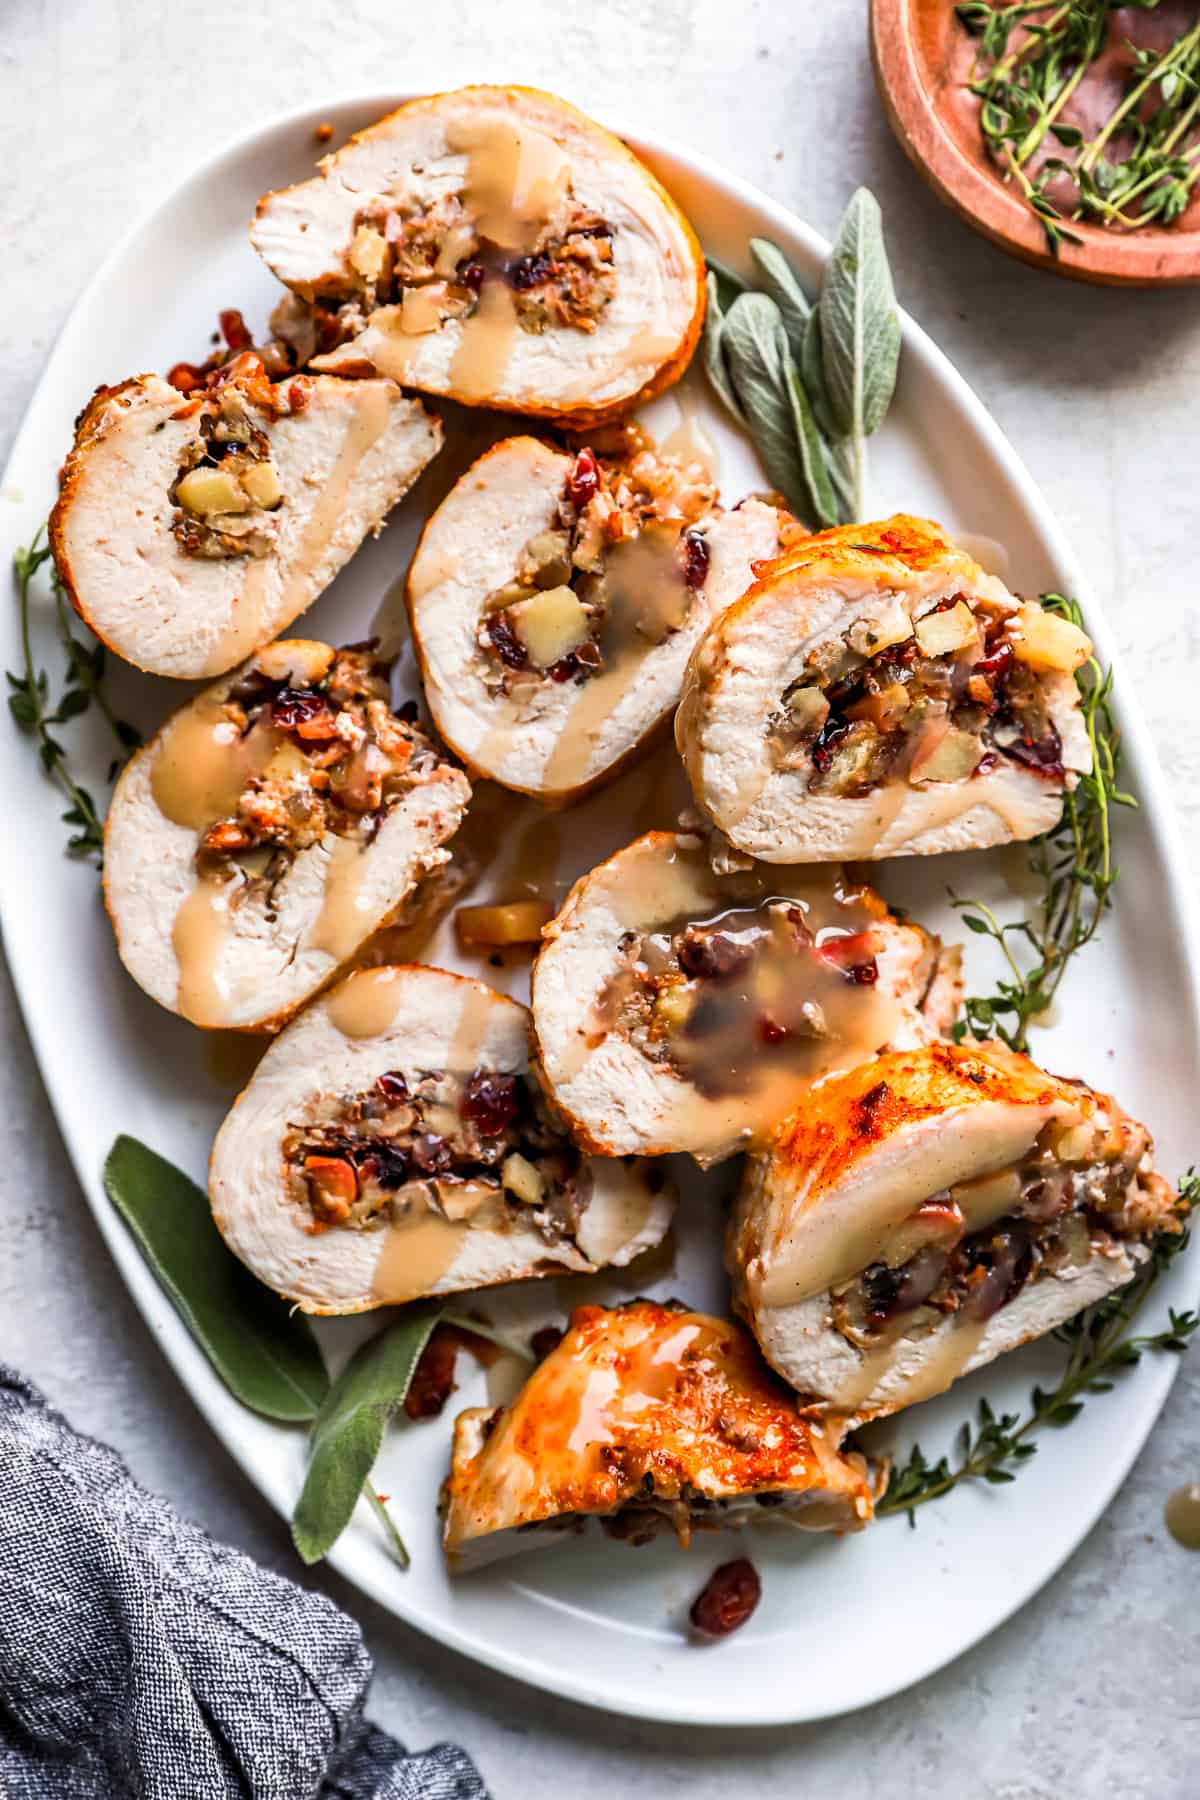 Turkey roll stuffed with cranberries and sage on a white plate.